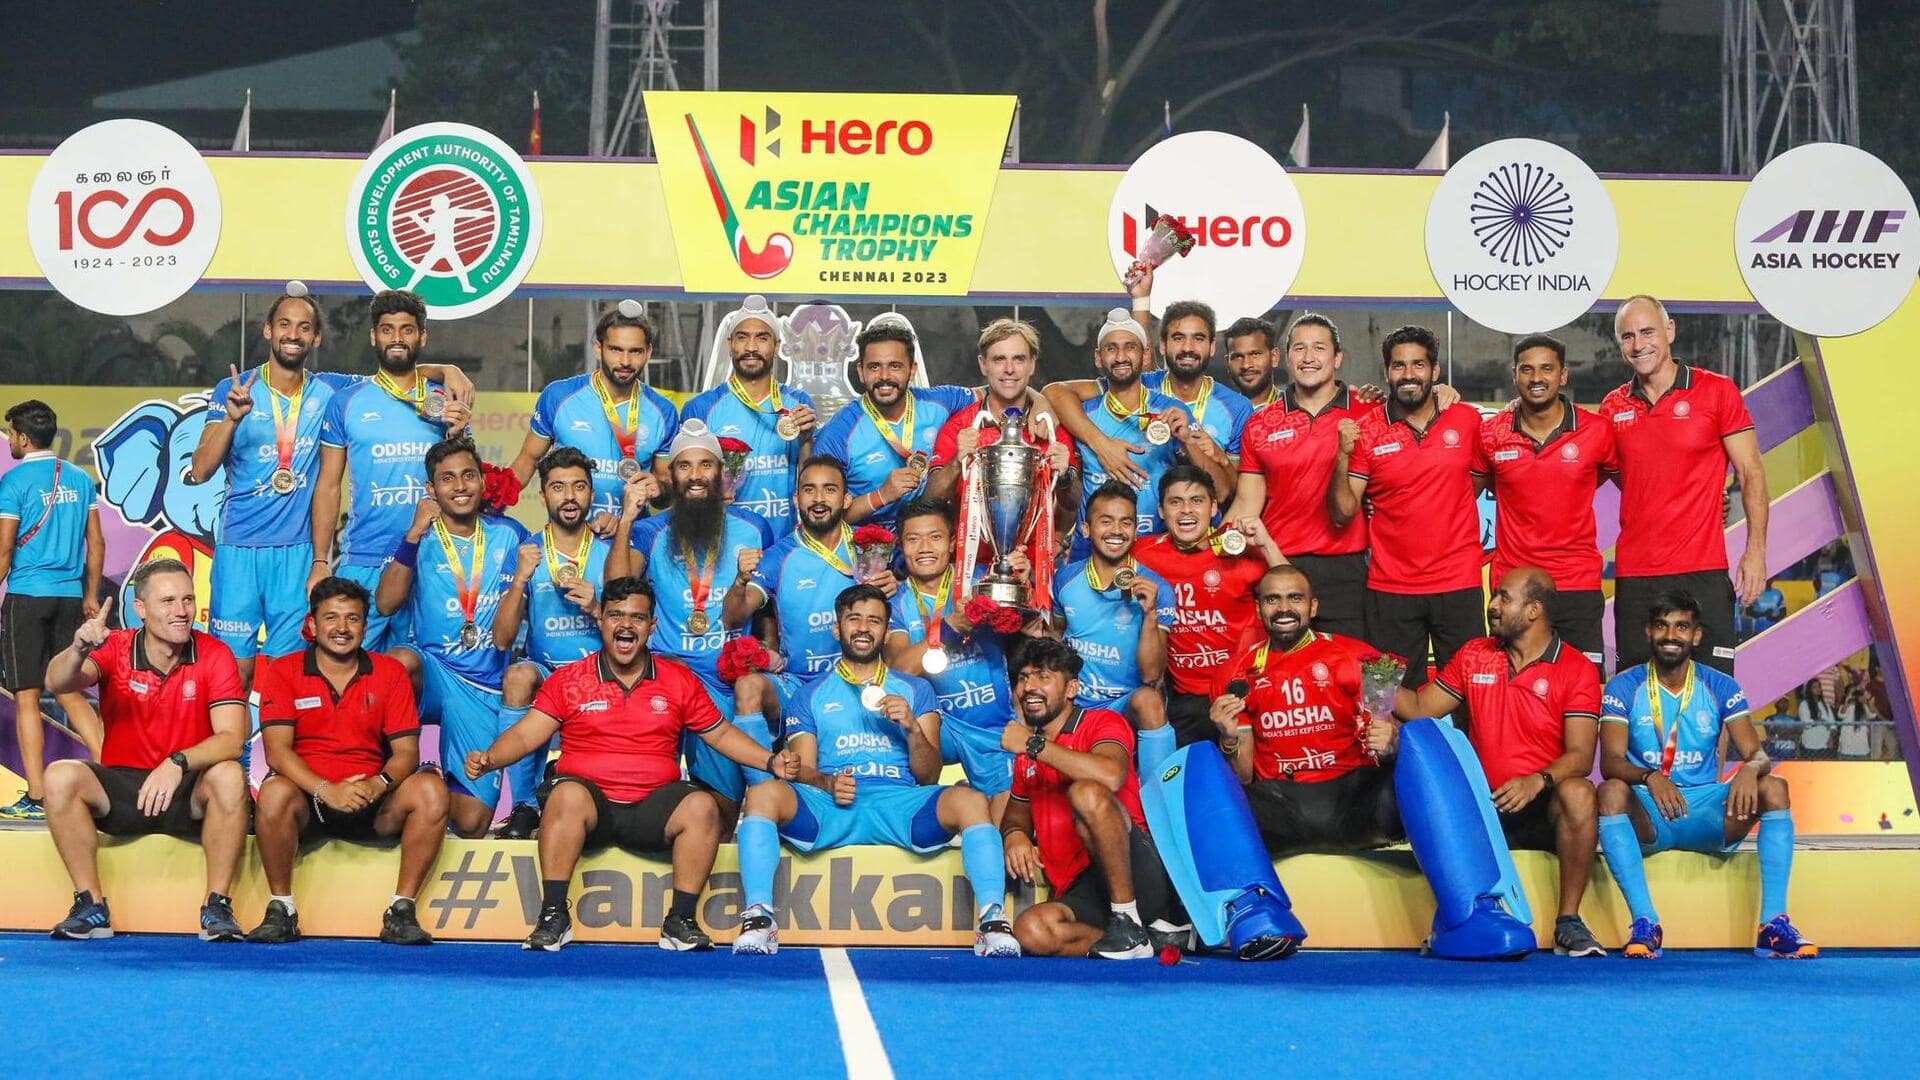 Asian Champions Trophy 2023: Decoding India's journey in the tournament